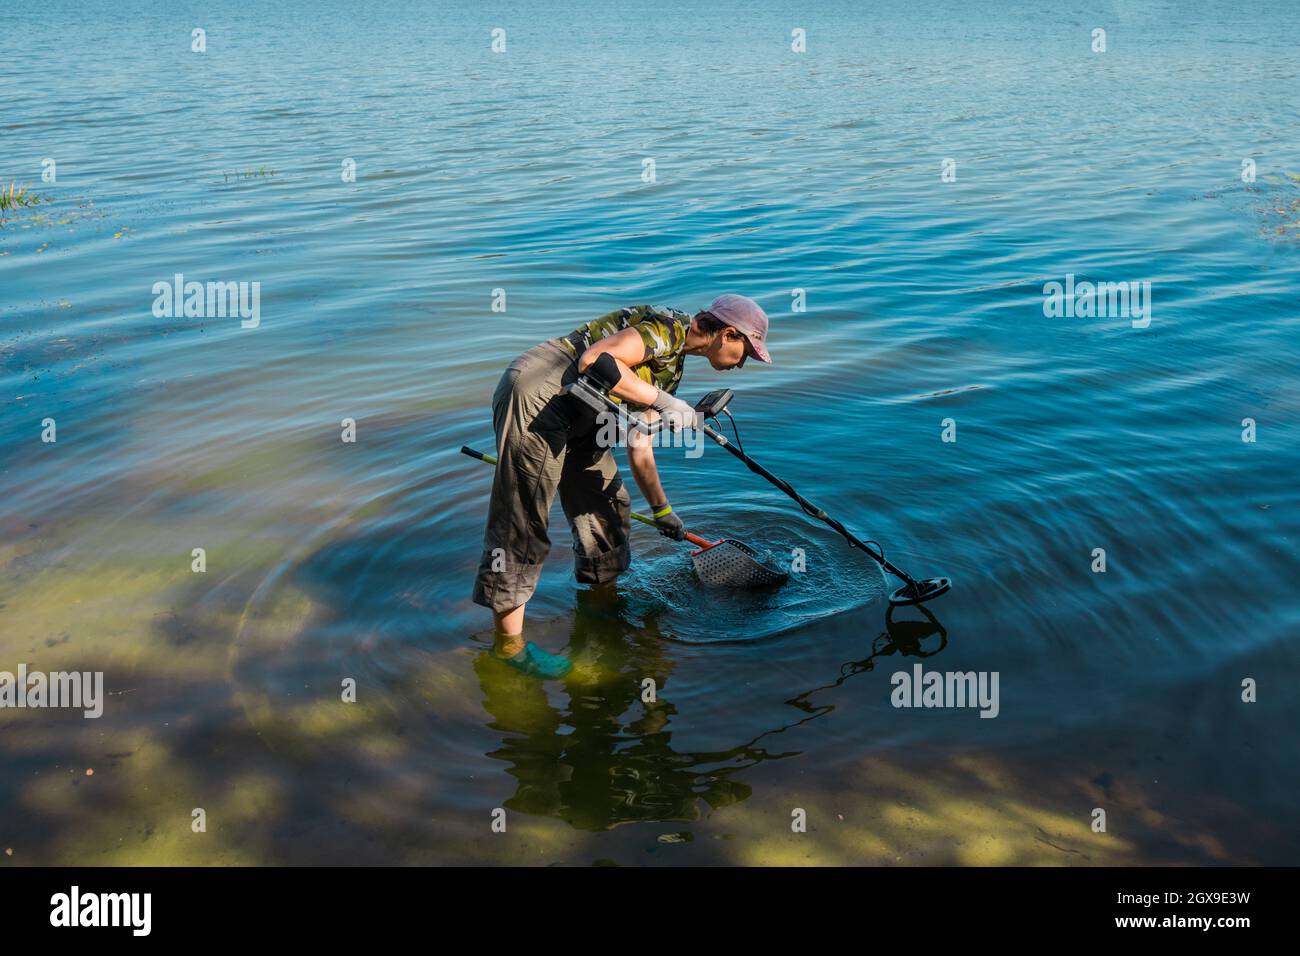 A woman collects metal in the river with a metal detector on a sunny day. Stock Photo